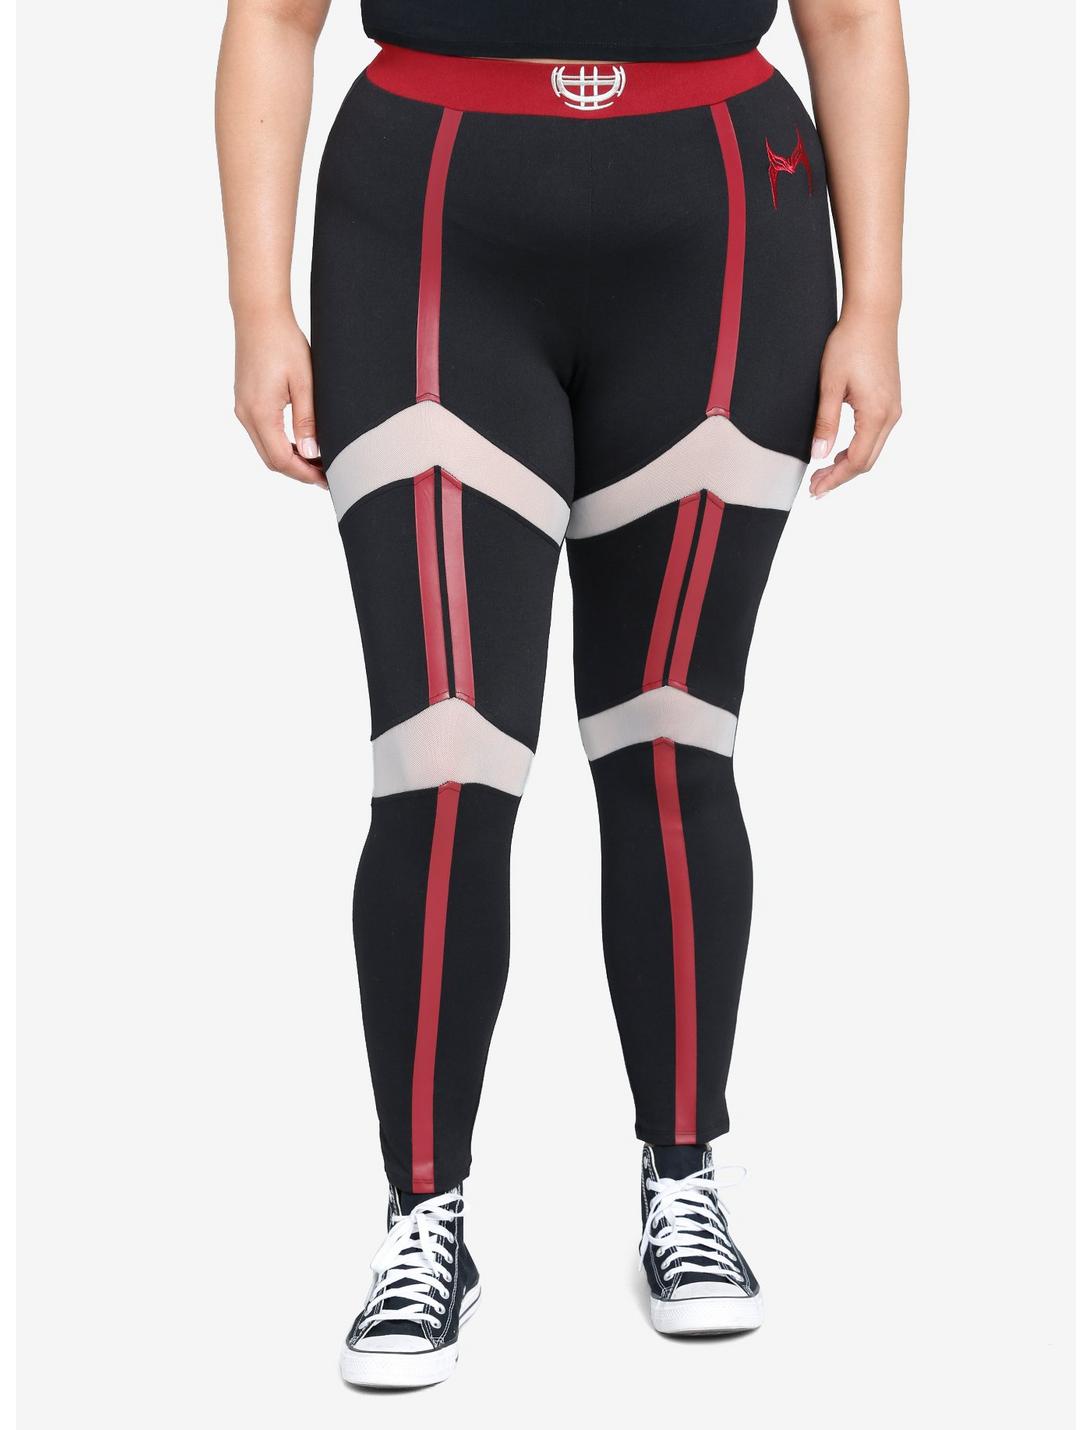 Her Universe Marvel Scarlet Witch Mesh Leggings Plus Size Her Universe Exclusive, RED, hi-res